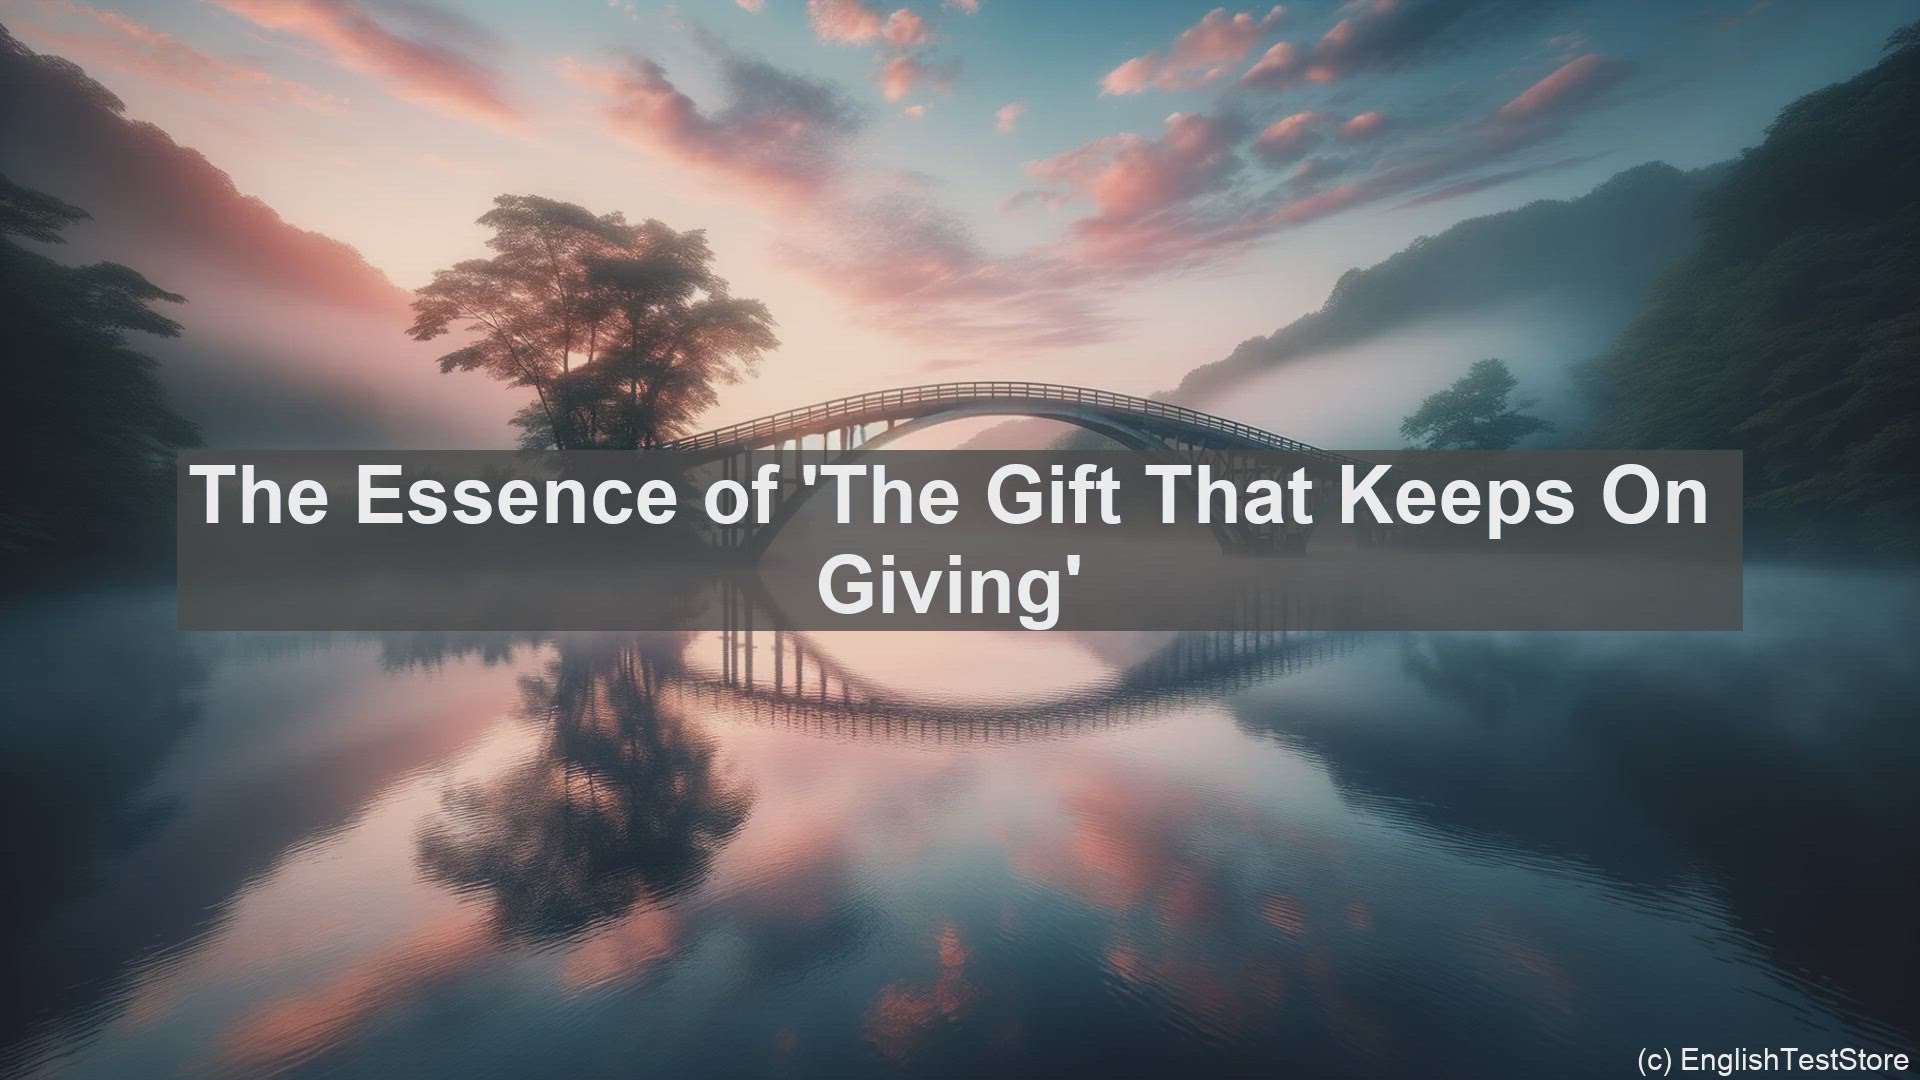 Christmas marketing: The storytelling gift that keeps on giving